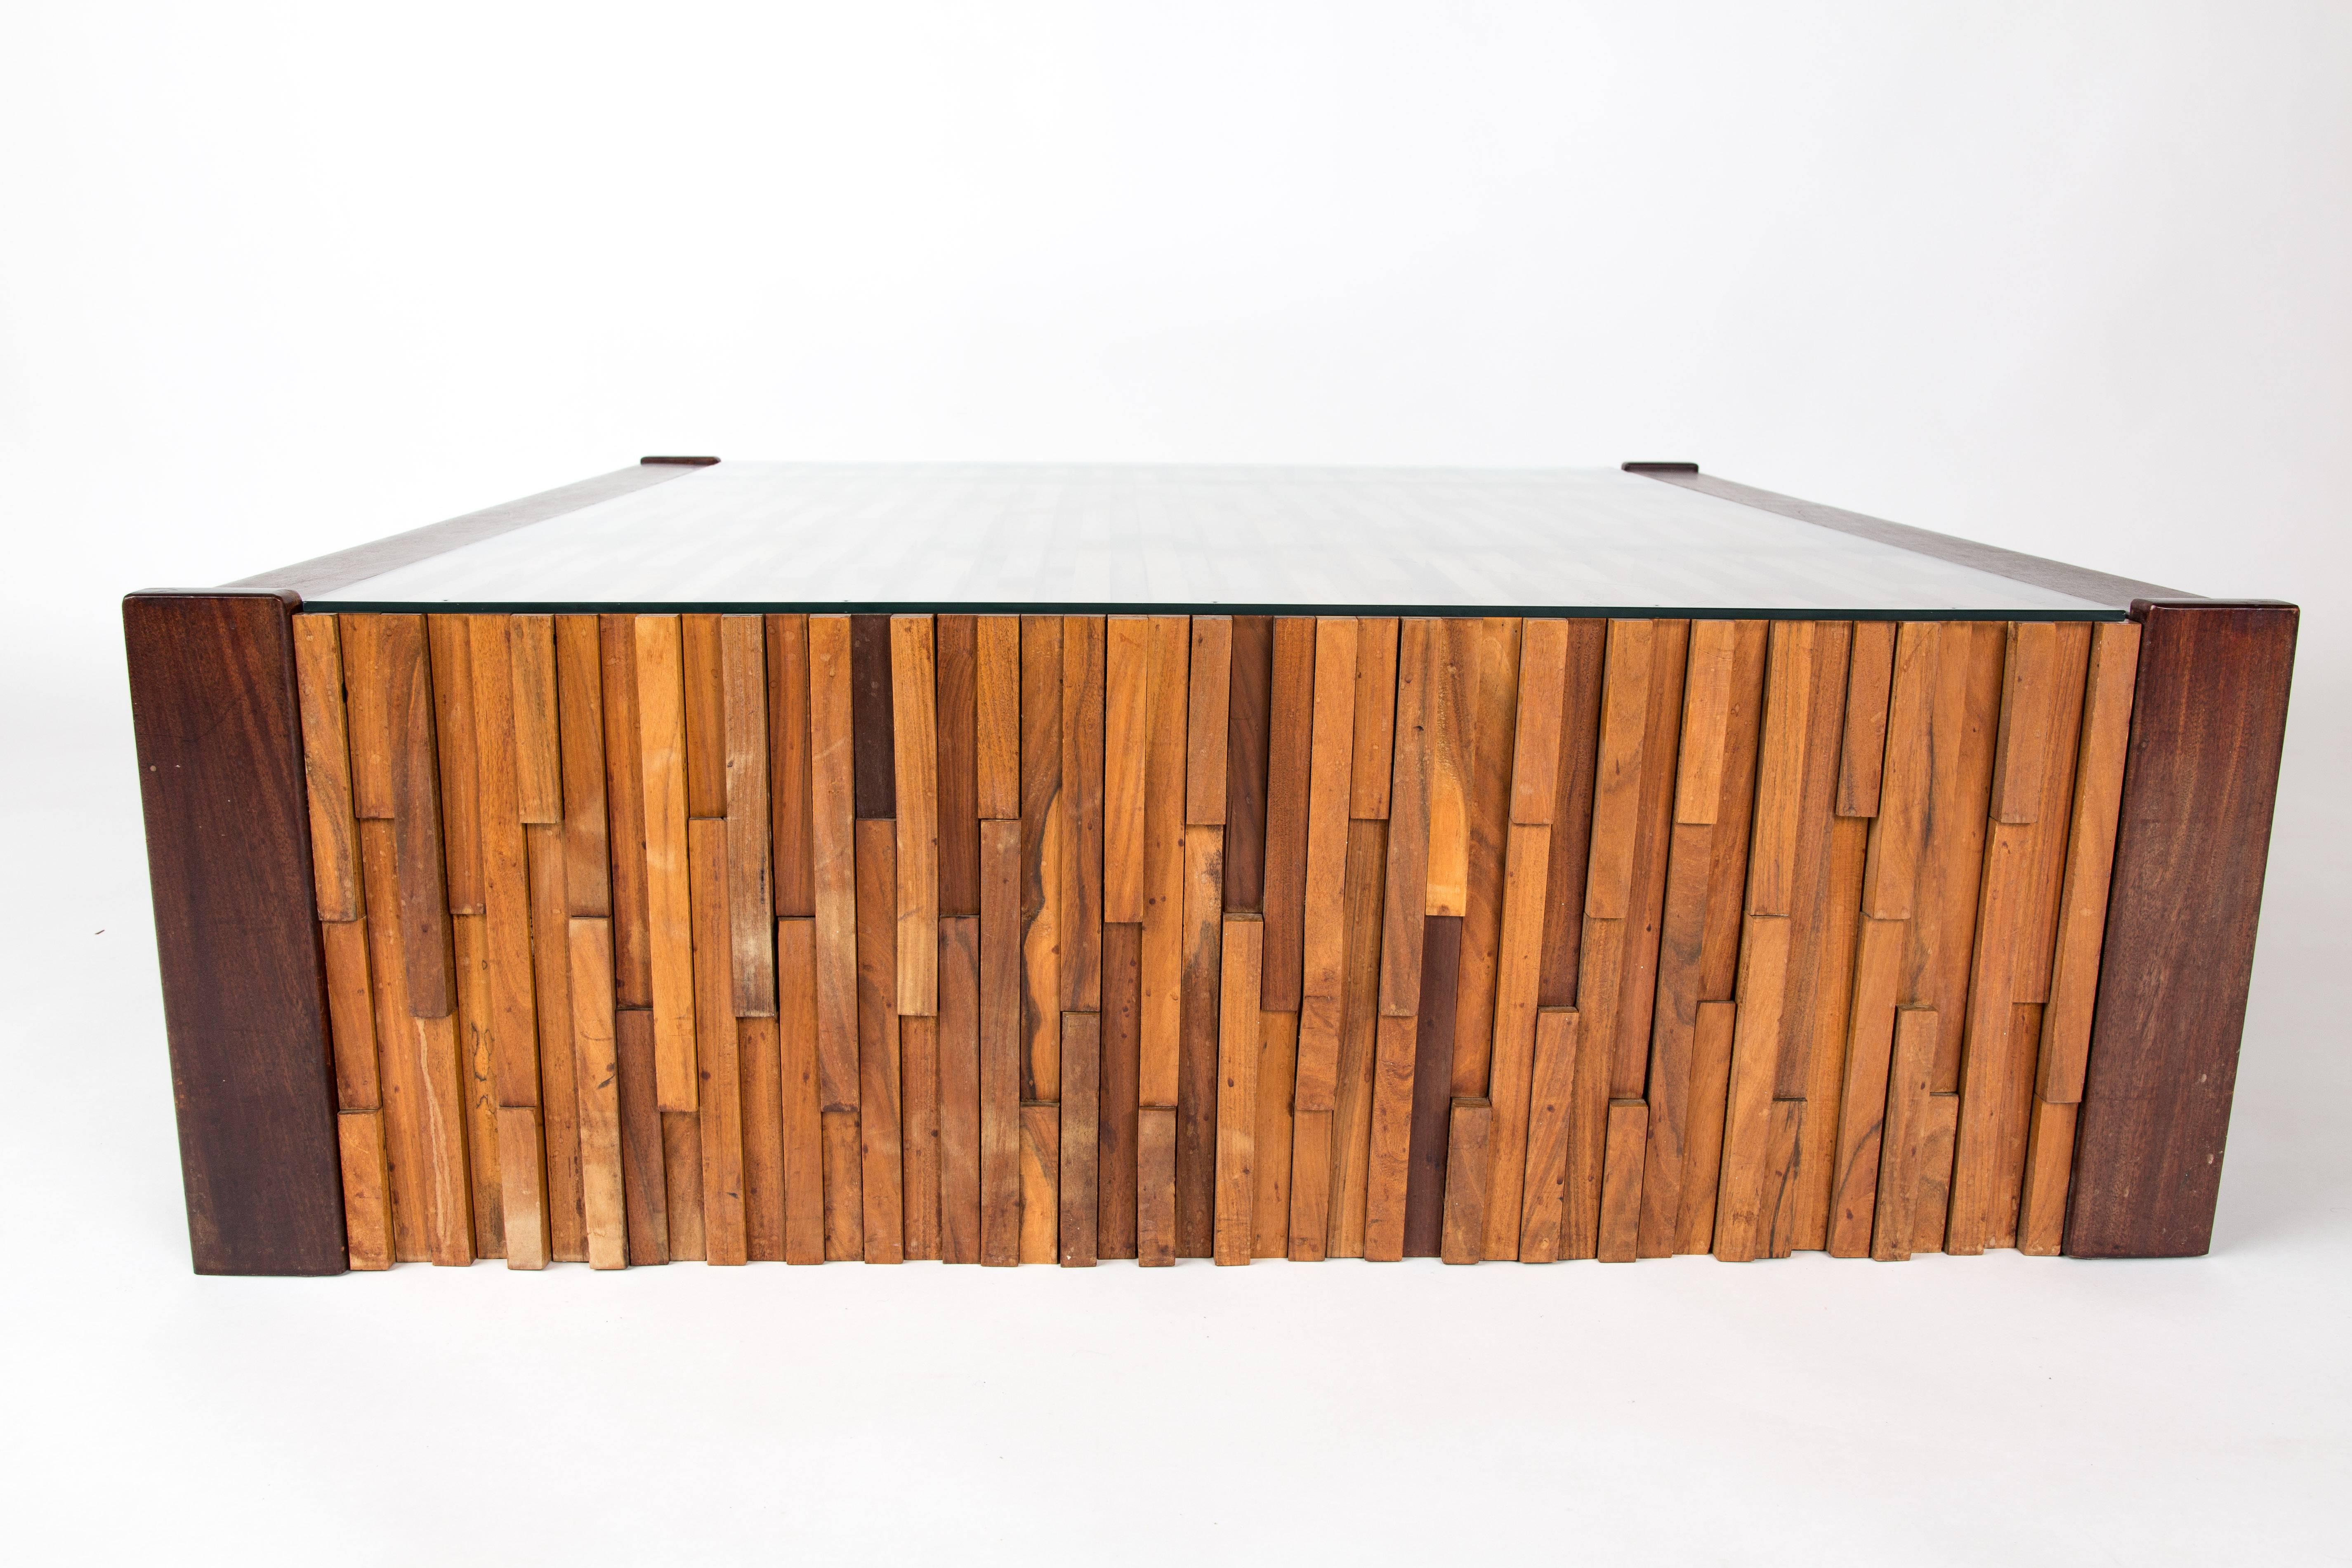 PERCIFAL LAFER . Brutalistic large coffee table designed by Percival Lafer in Brazil, circa 1960.

The table is made of different tropical hard wood, for example Jacaranda. The different layers of small wood pieces are put together to an arty